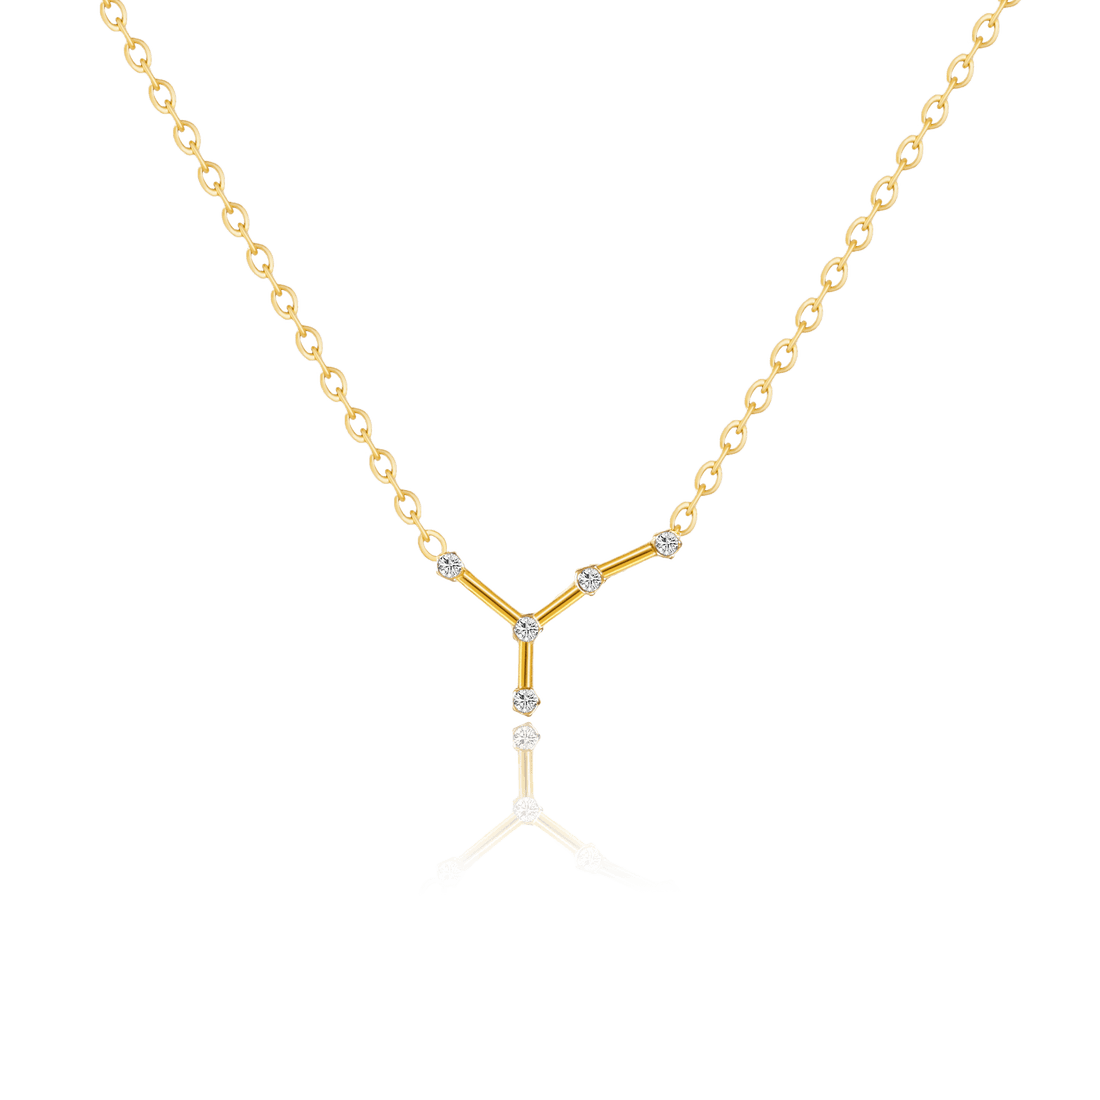 bianco rosso Necklaces Cancer Zircon Gold Necklace cyprus greece jewelry gift free shipping europe worldwide